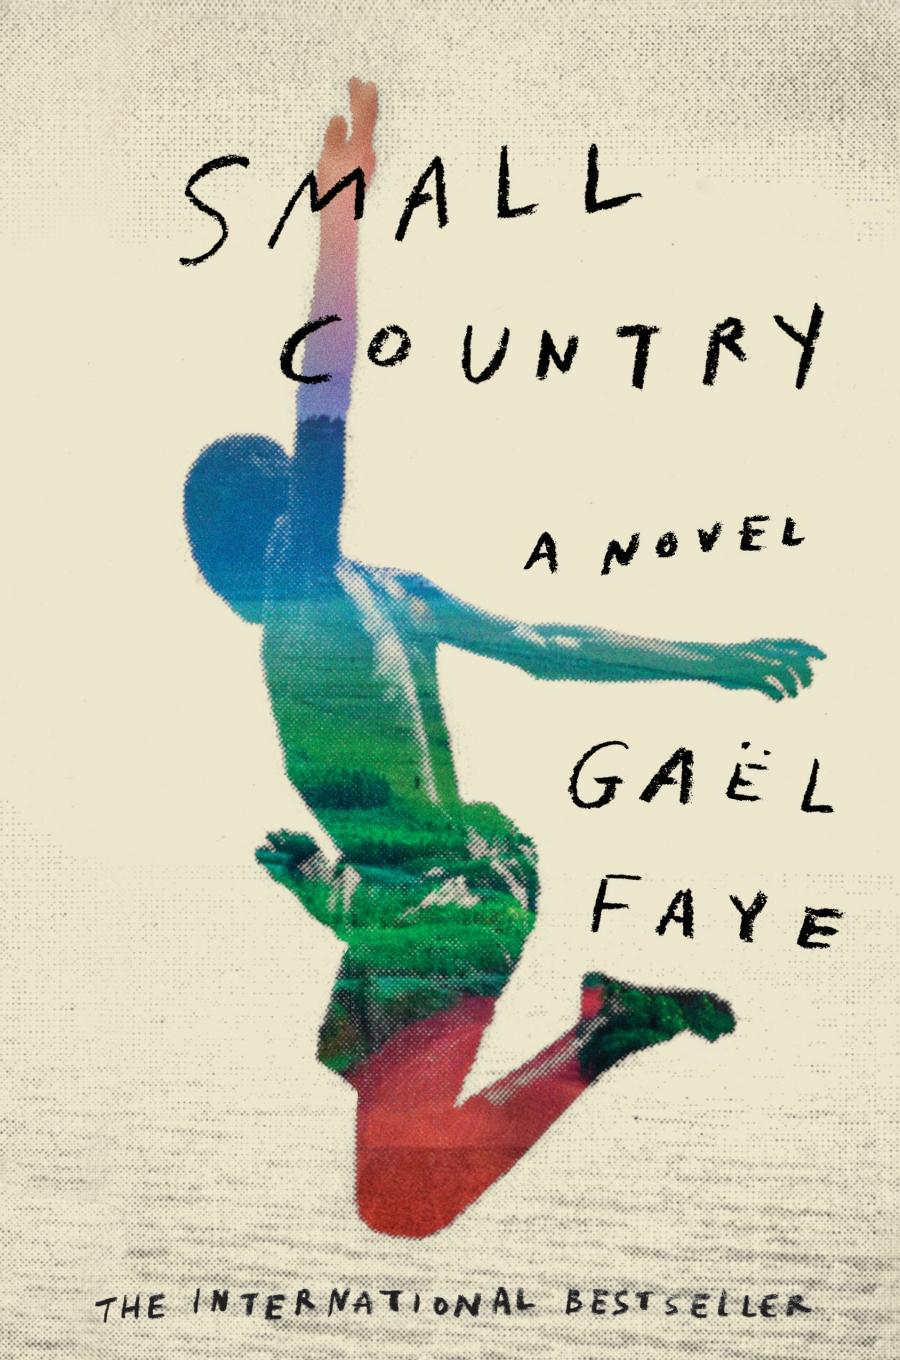 The cover of the novel 'Small Country,' which shows a boyish figure in blue, green and red leaping into the air with arms outstretched.